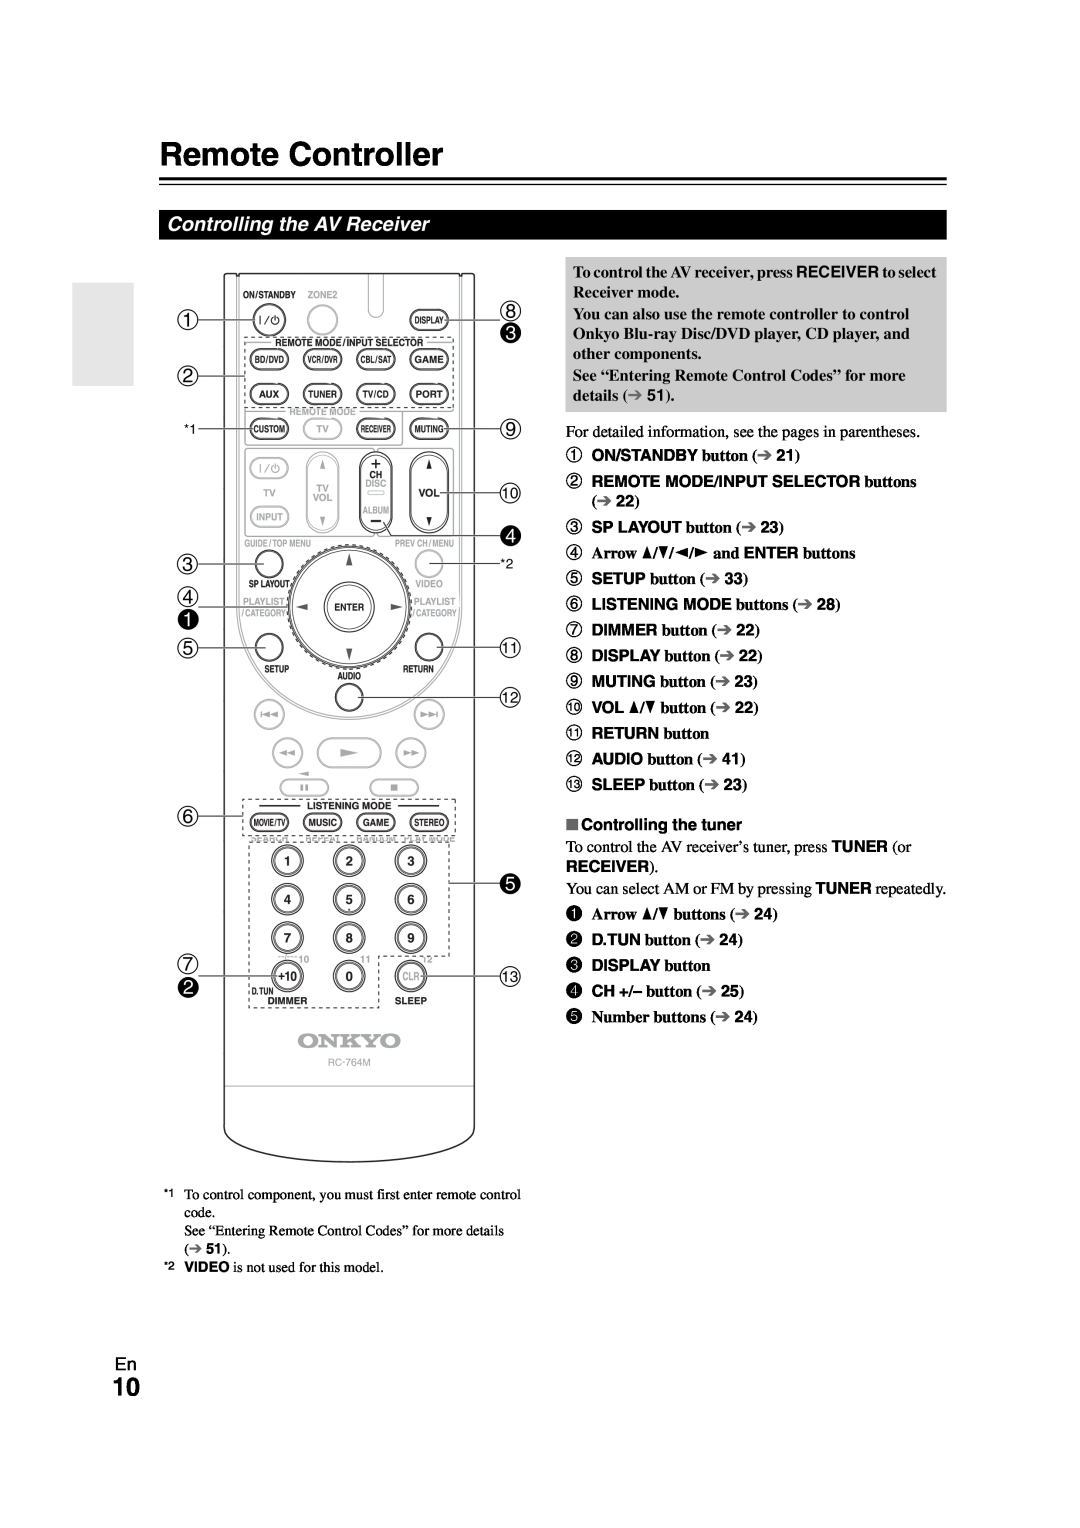 Onkyo HT-S5300 instruction manual Remote Controller 